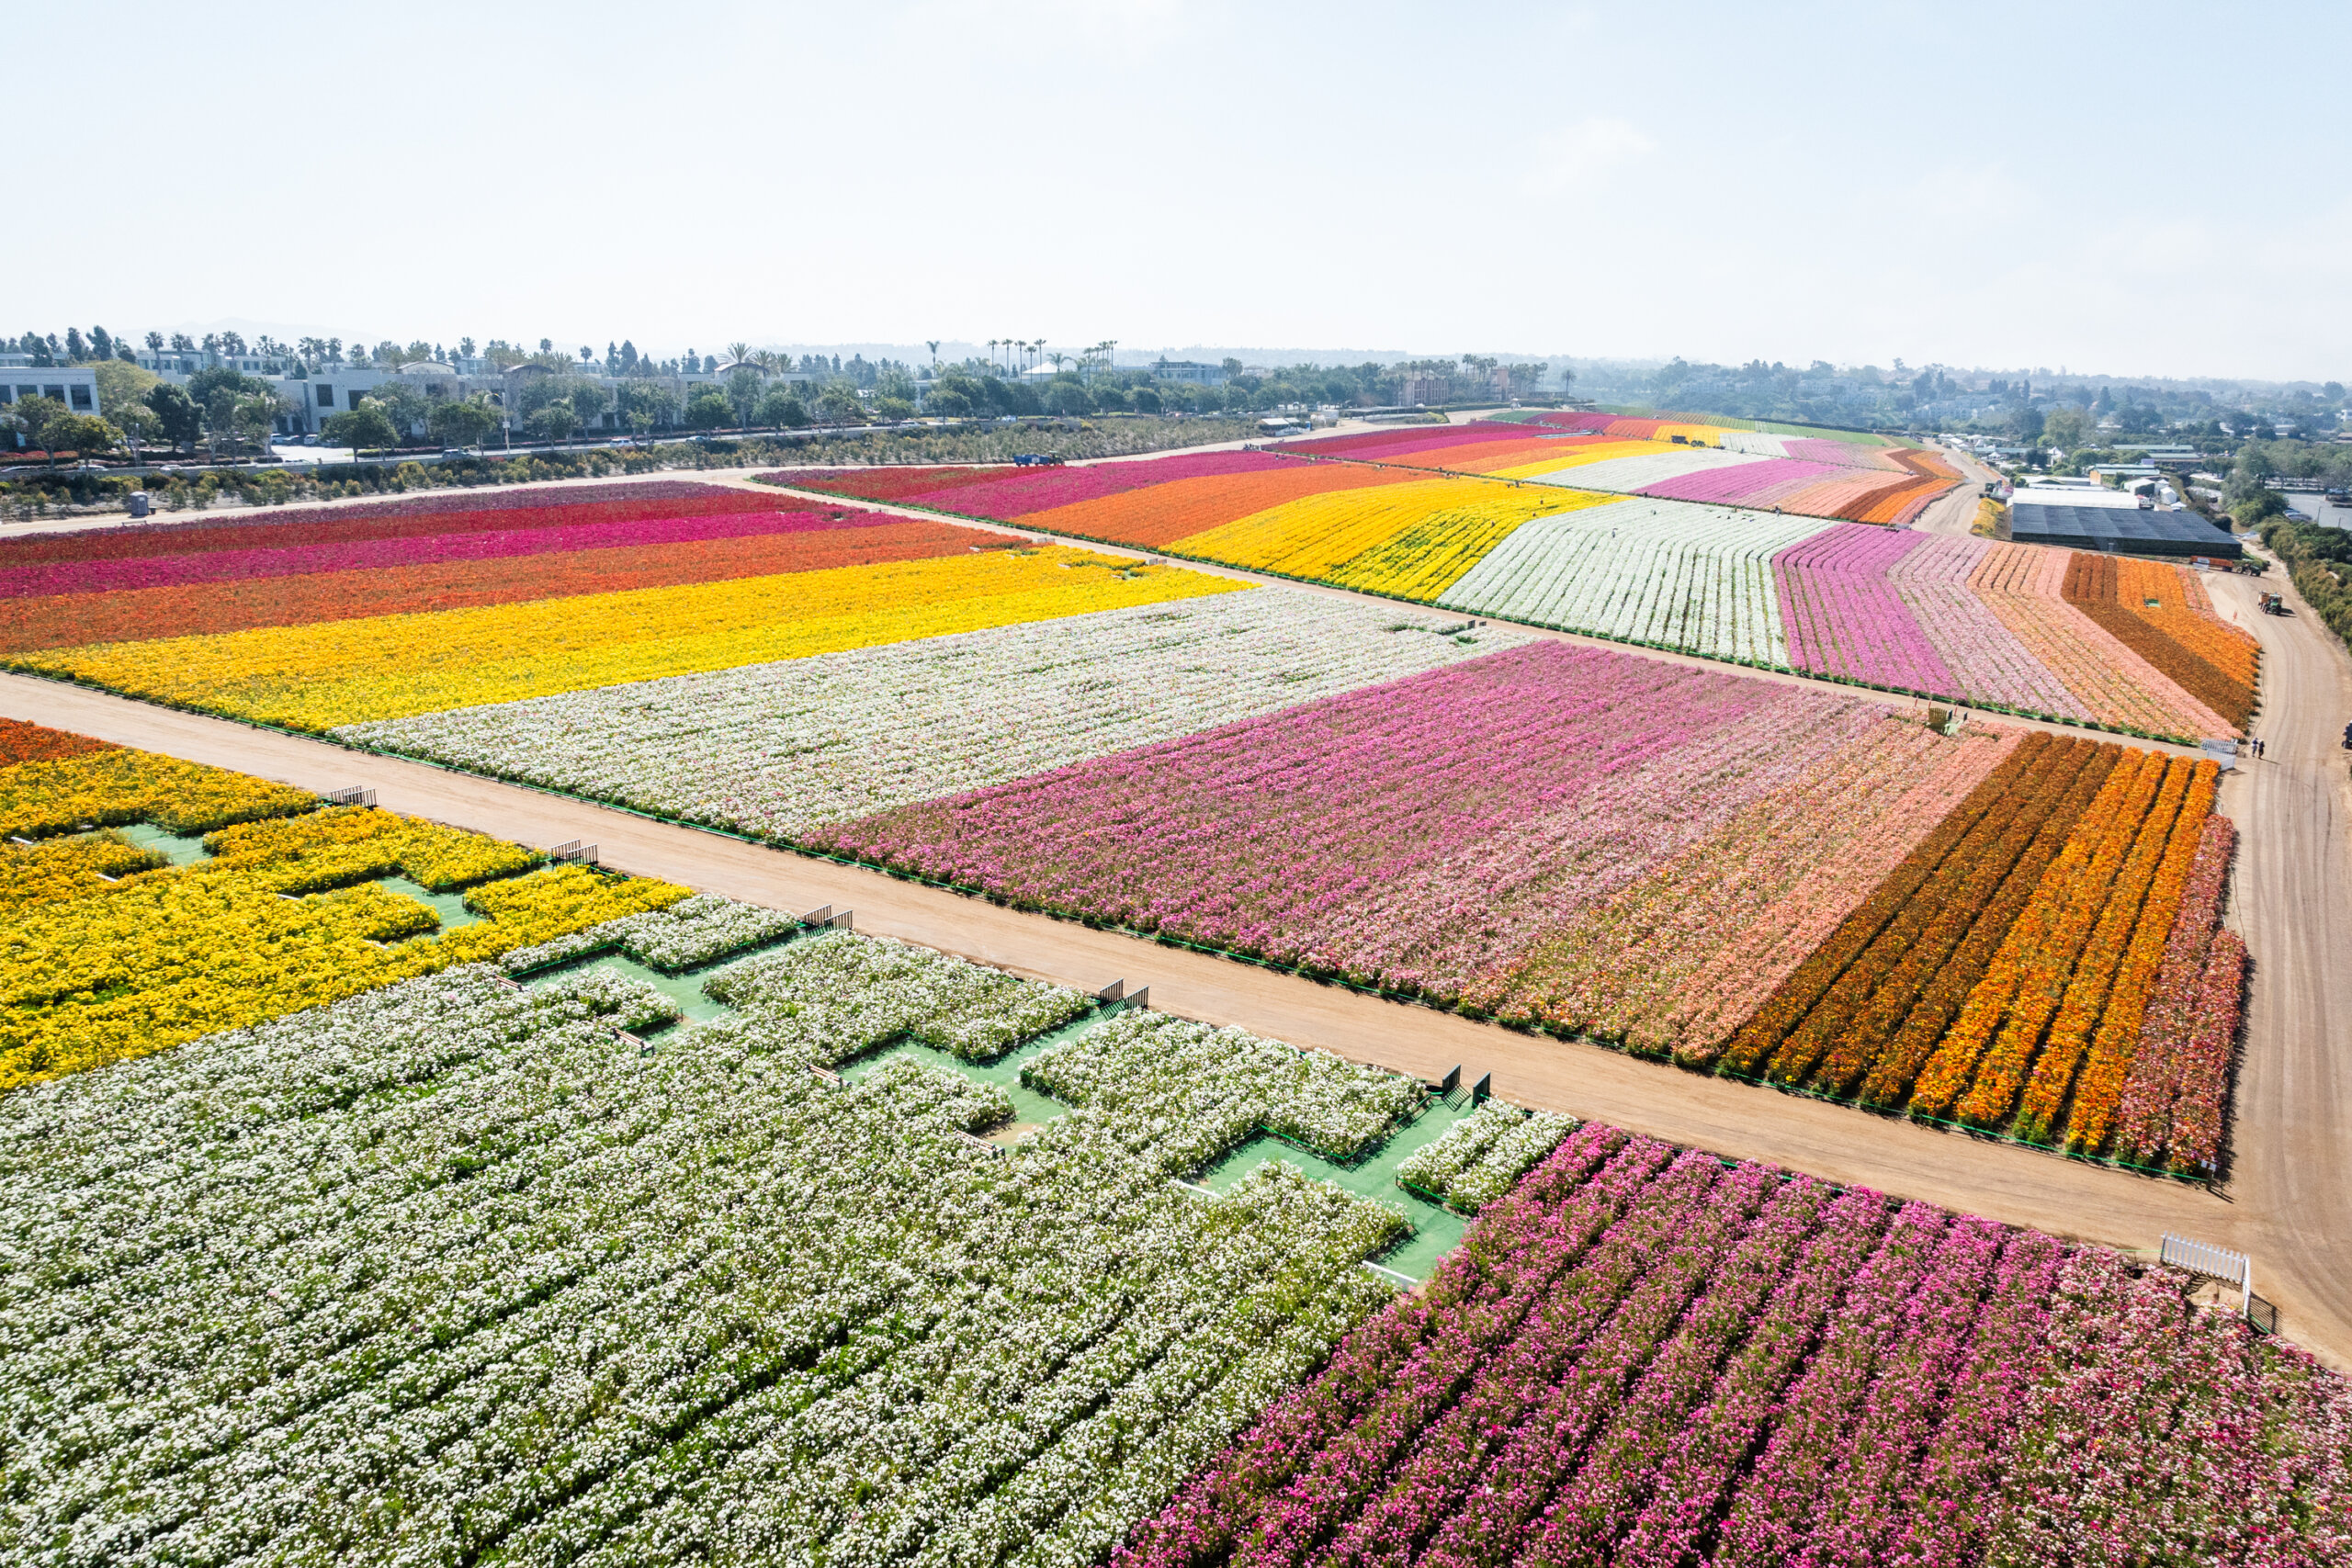 Aerial view showing the organized stripes of colors at The Flower Fields